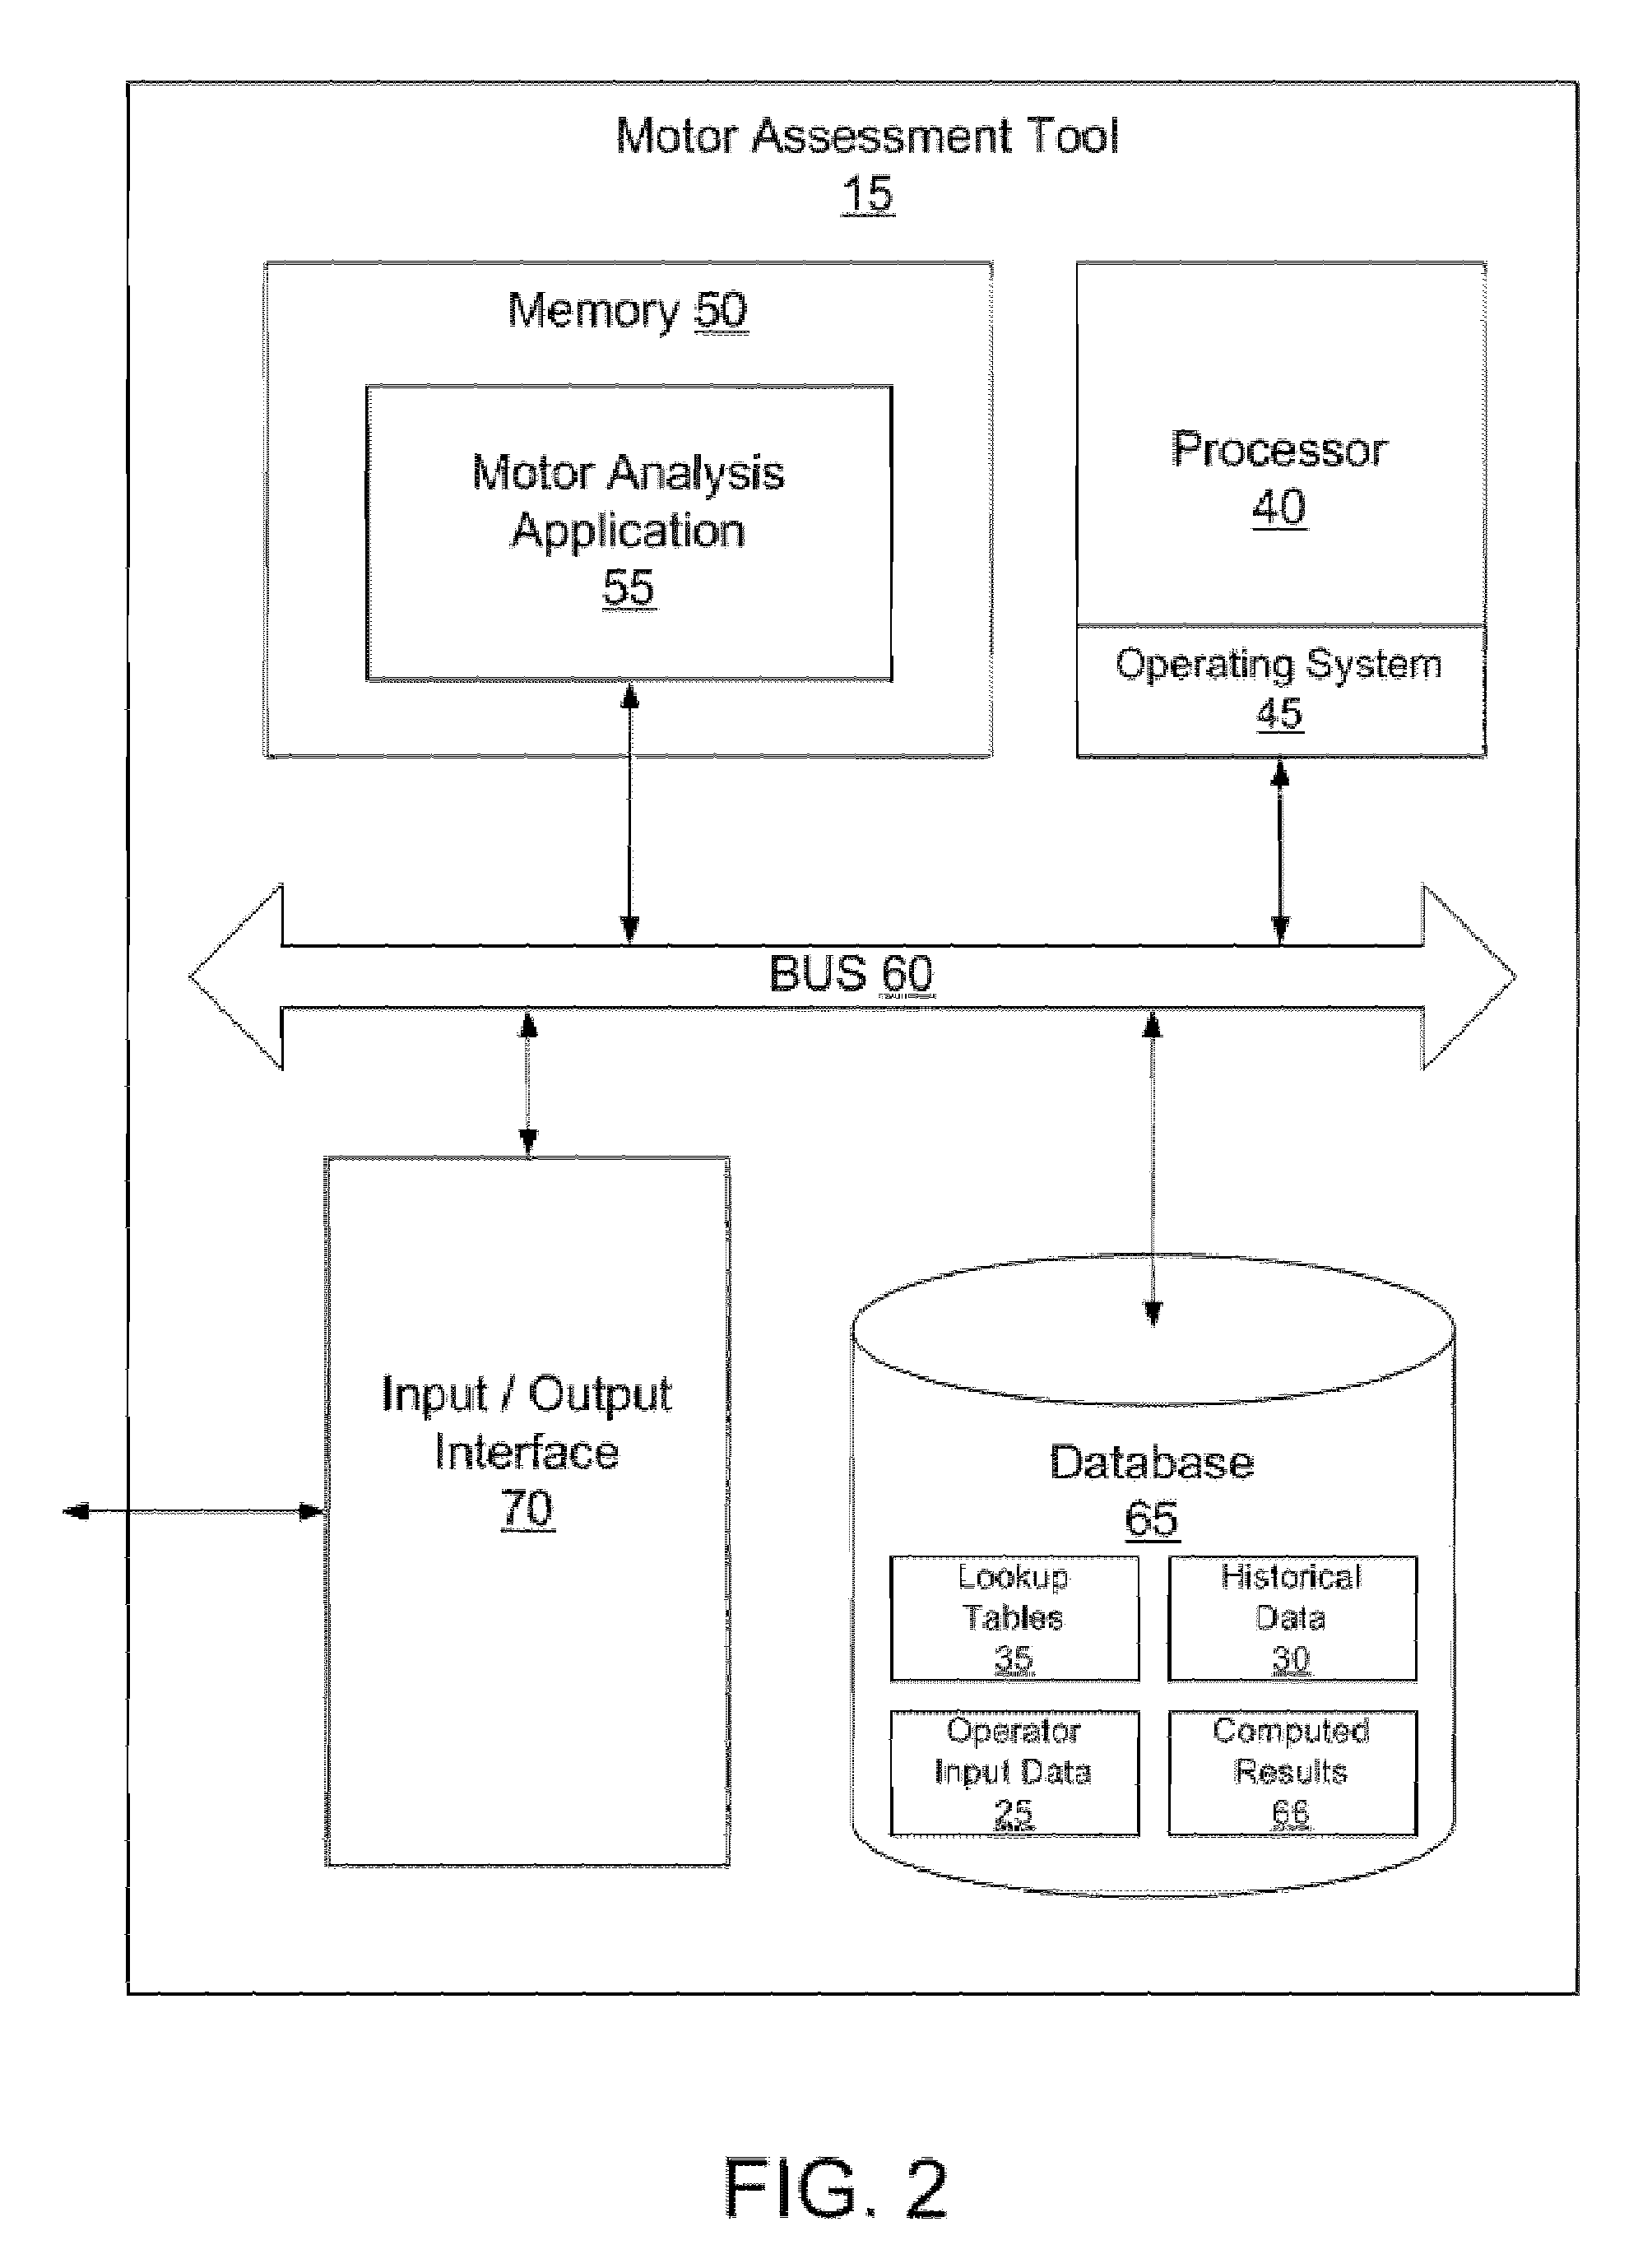 Systems, methods and computer program products for assessing the health of an electric motor